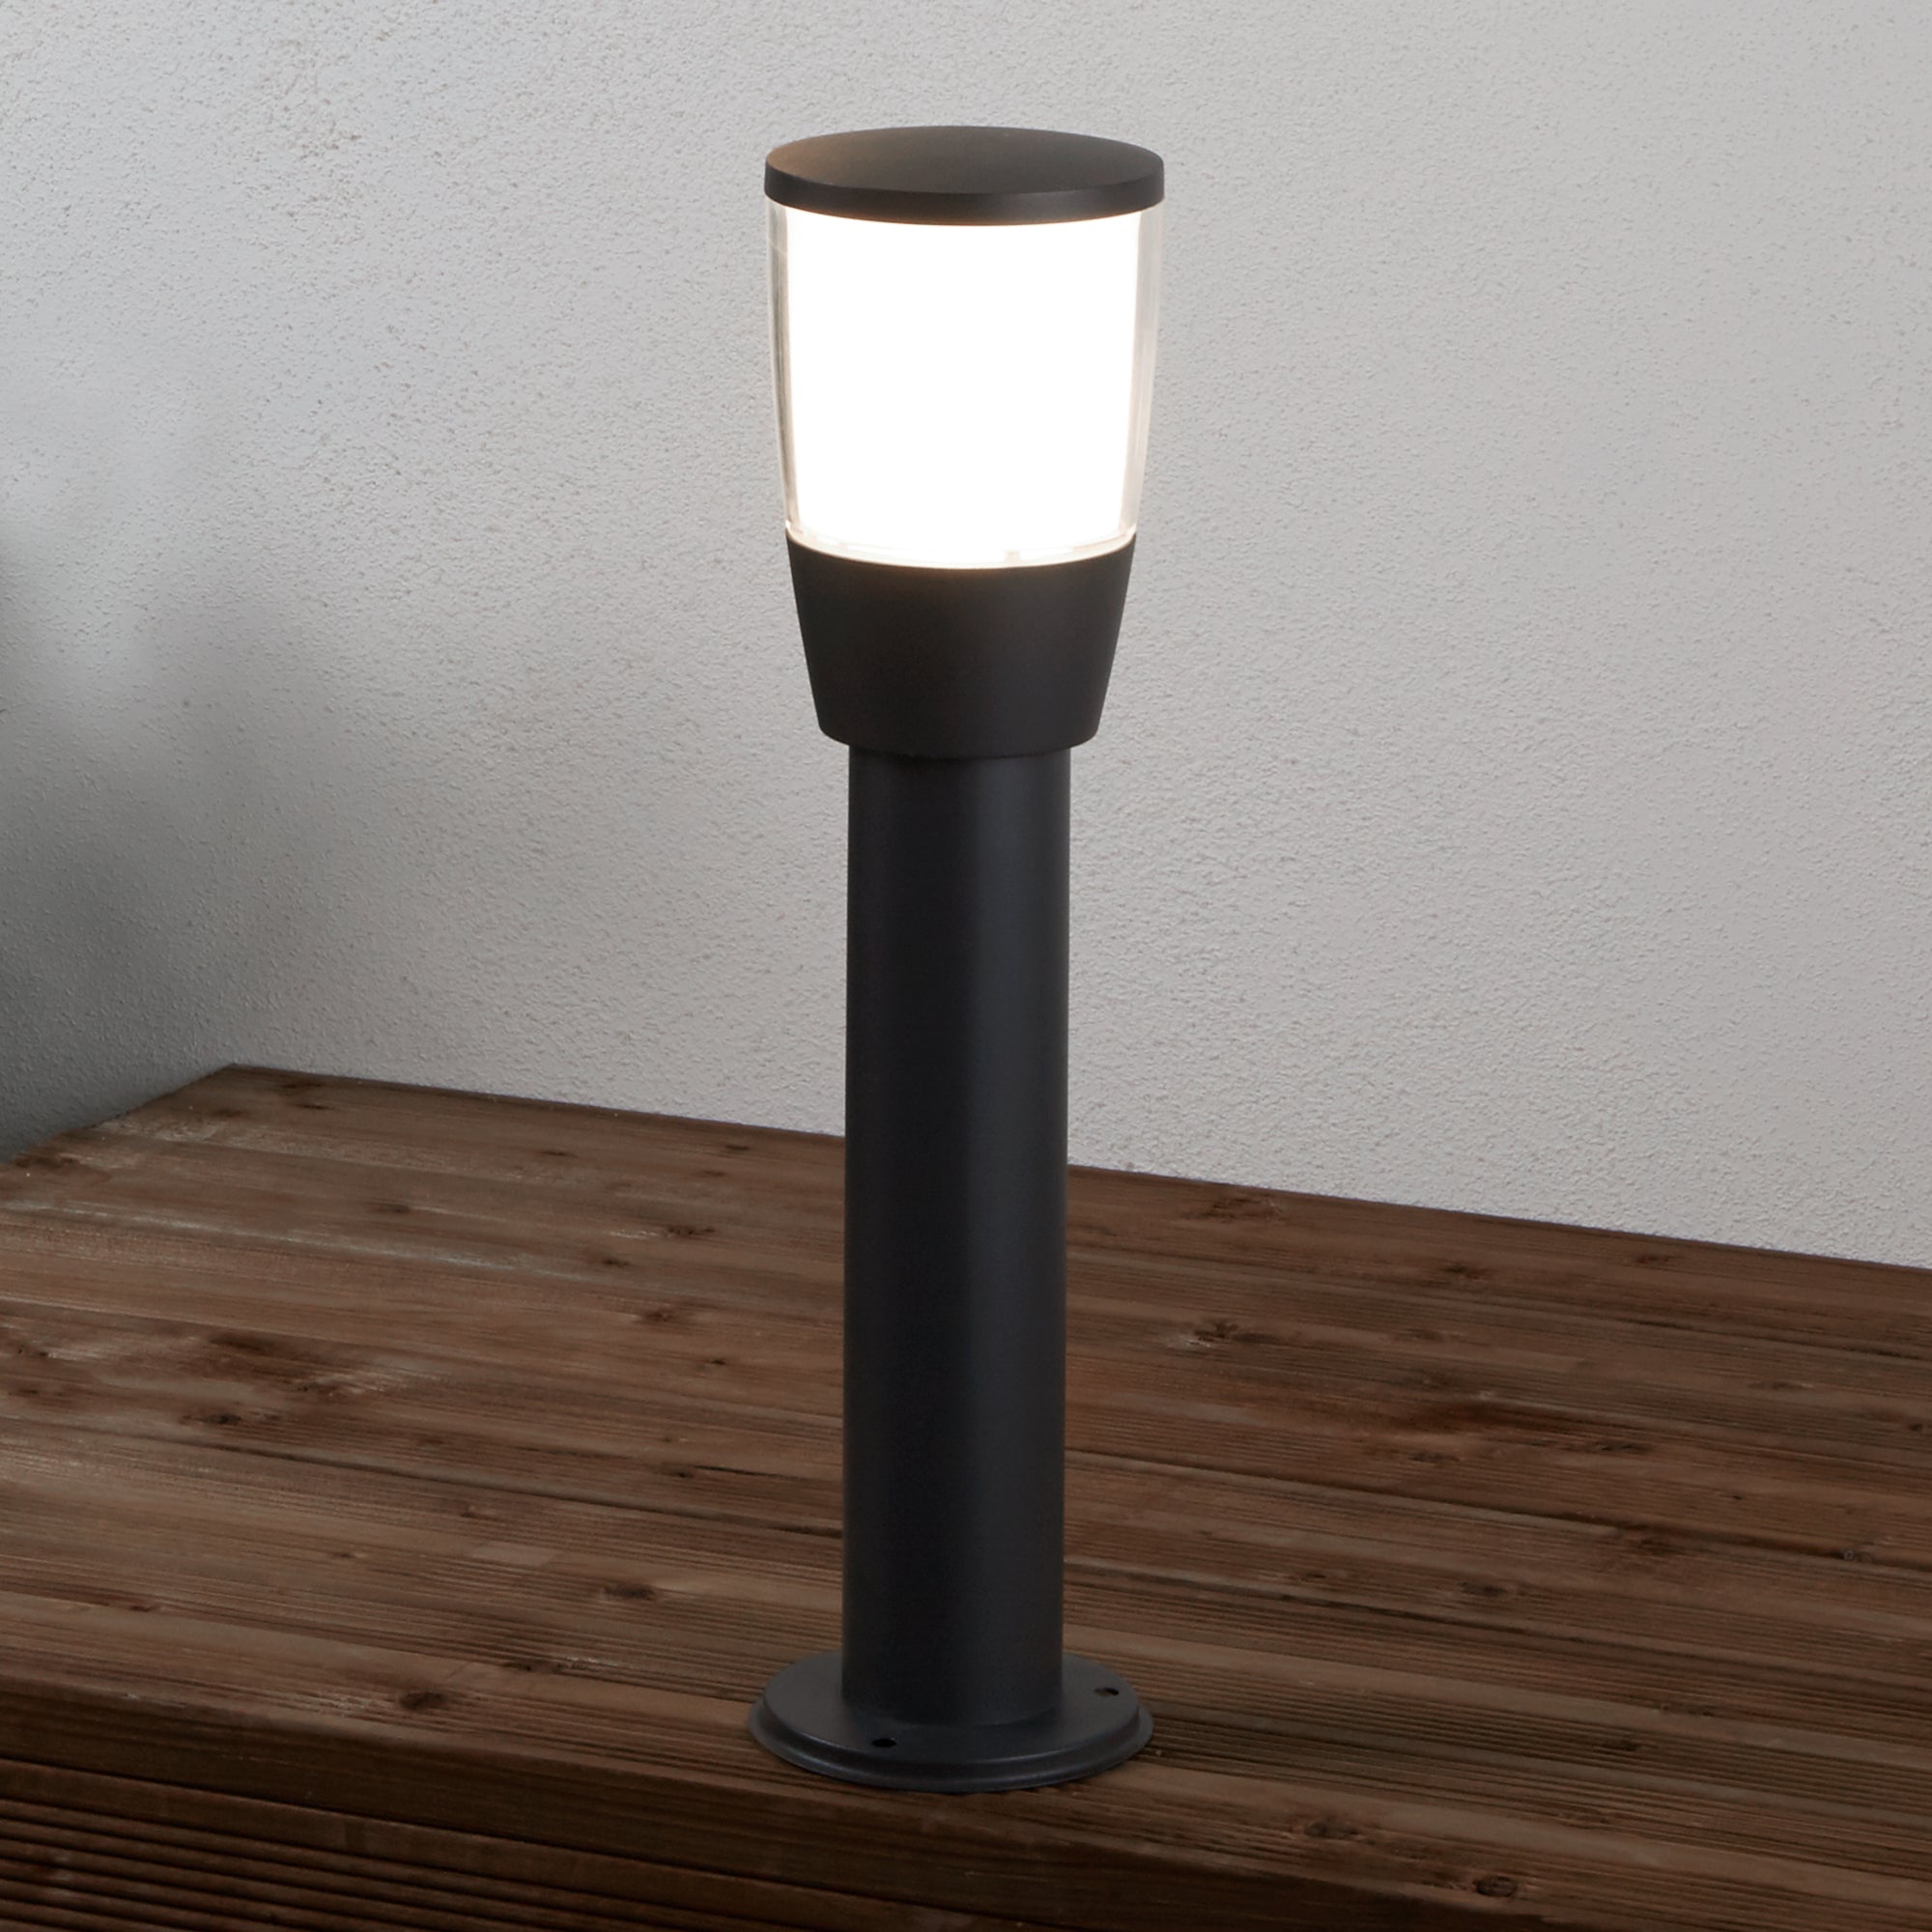 Black bollard light, also known as a post light. Black post with a polycarbonate clear diffuser and frosted inner.